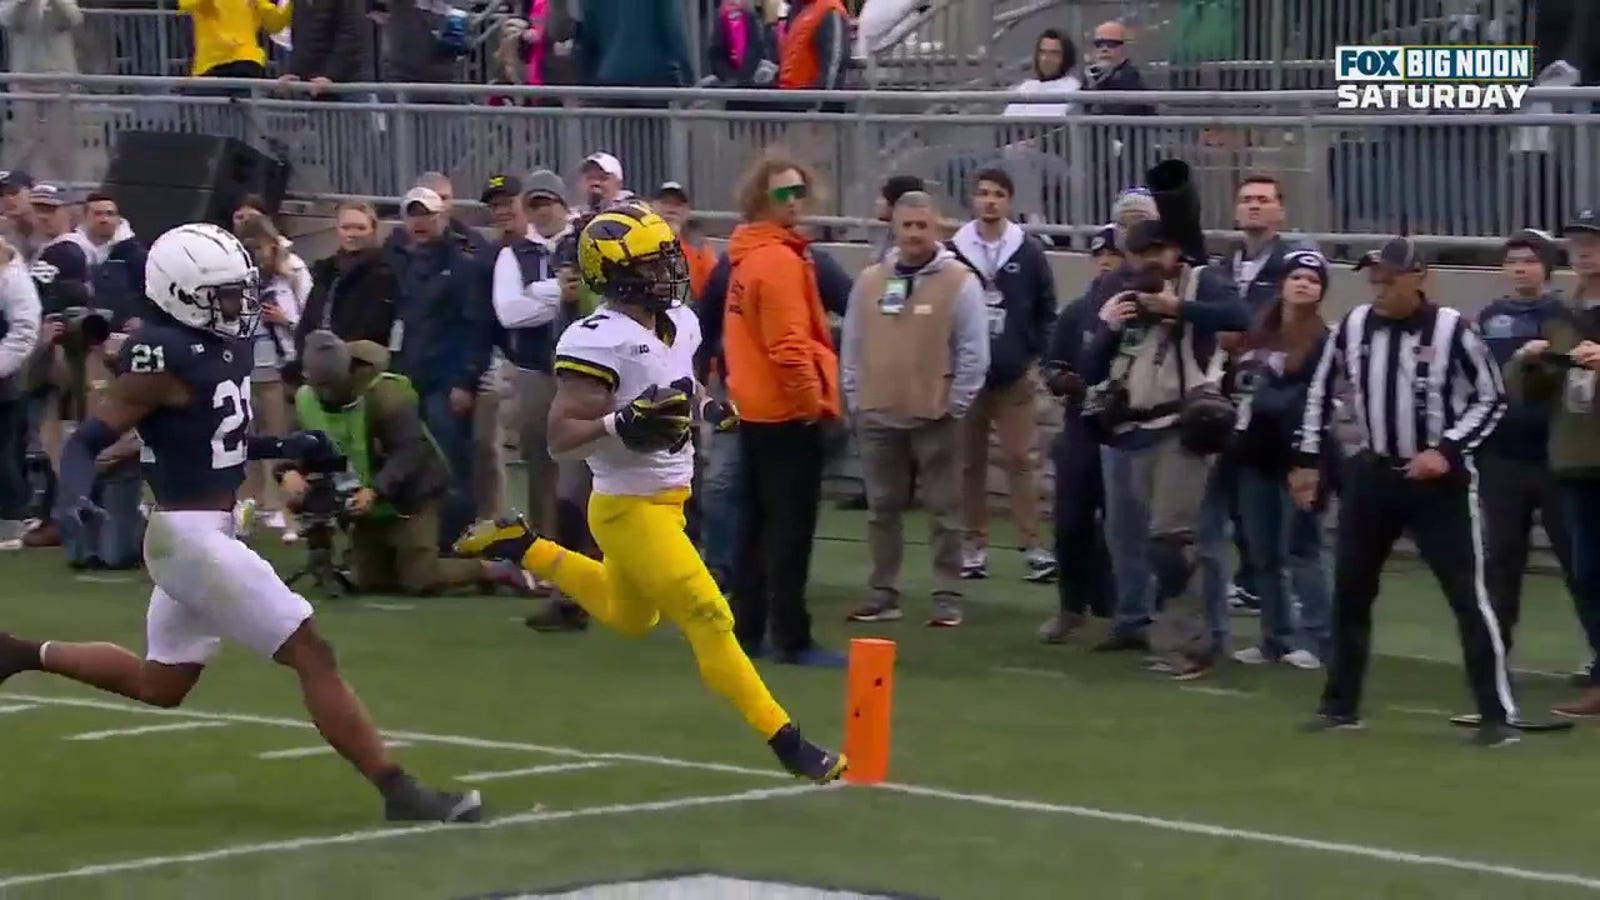 Michigan's Blake Corum rushes for a 30-yard touchdown to increase Wolverines' lead over Penn State